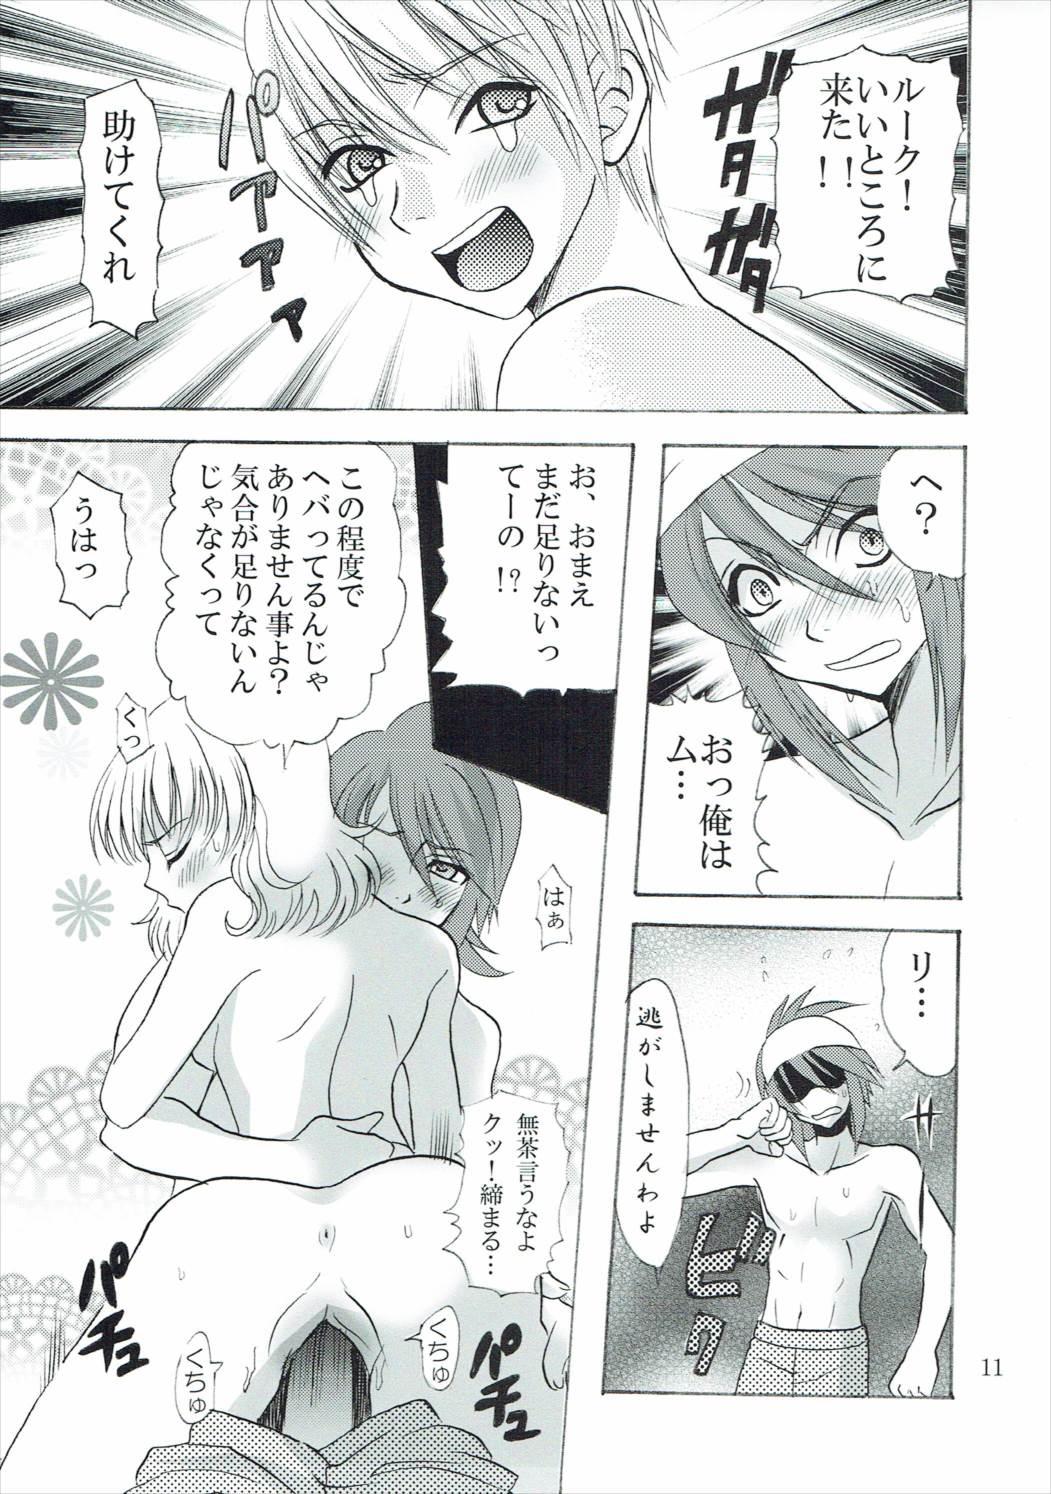 Gape 興味津々お年頃 - Tales of the abyss Bigboobs - Page 10